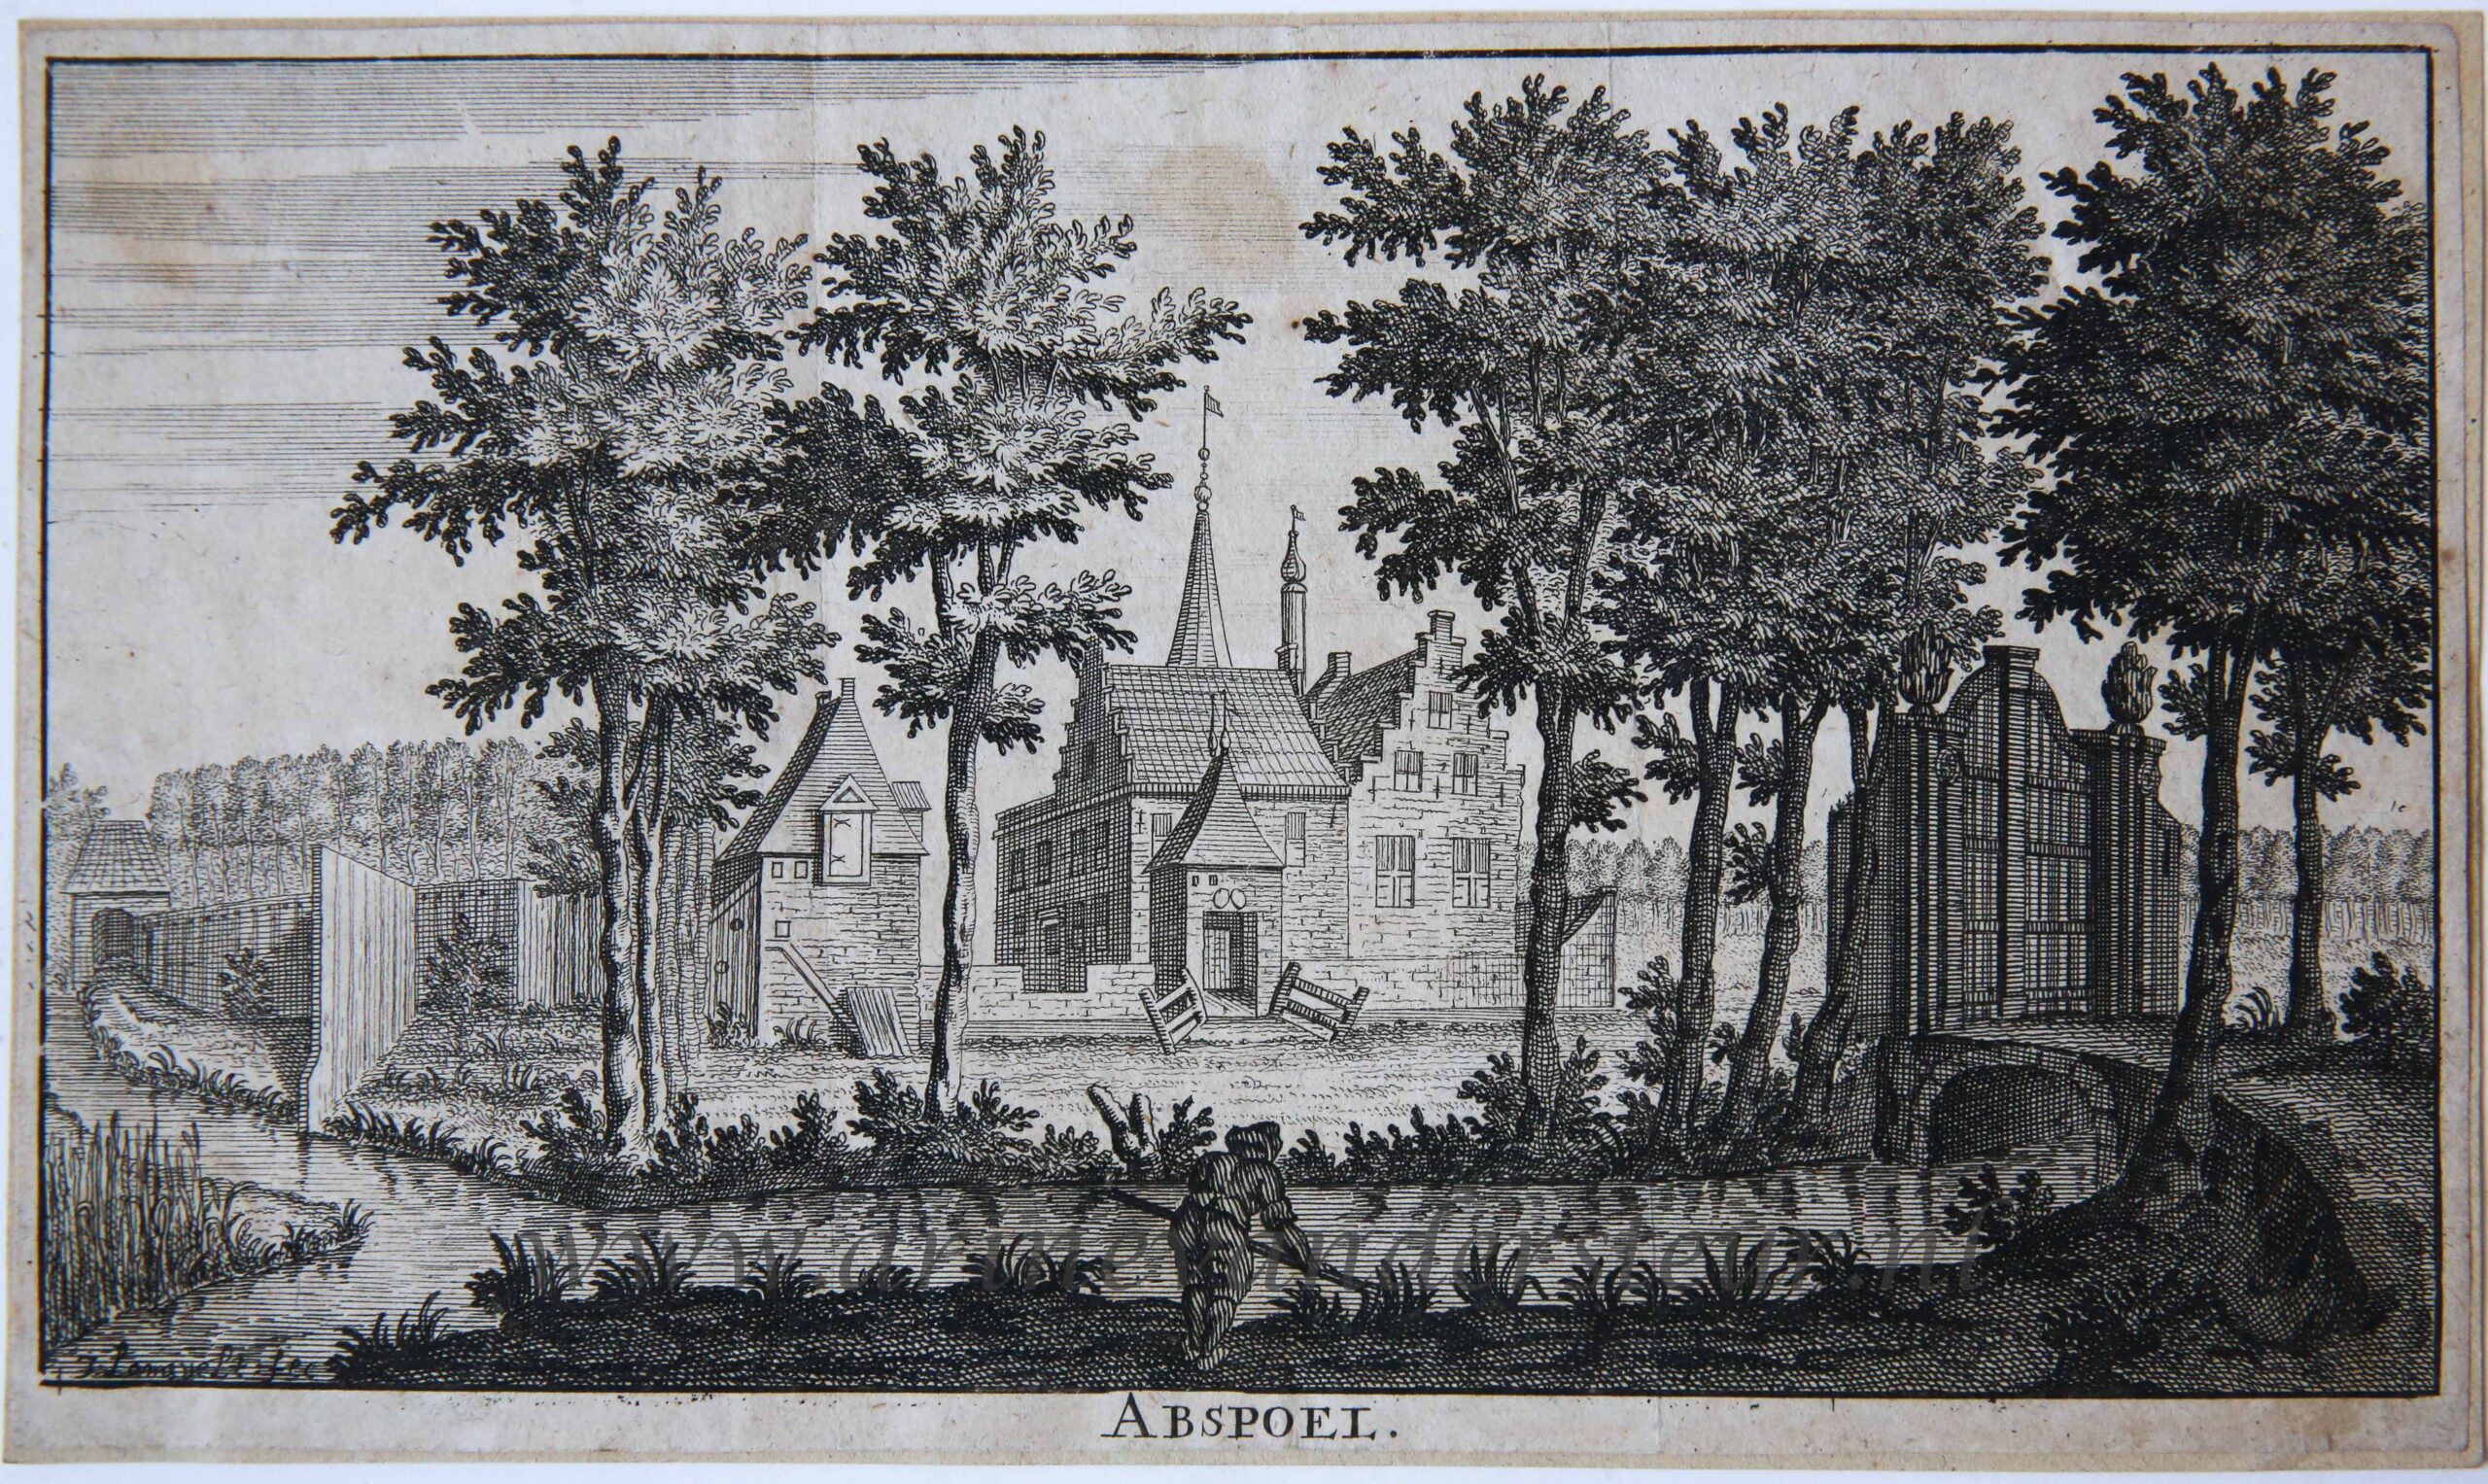 [Antique print, etching] ABSPOEL (near Oegstgeest), published ca. 1712.